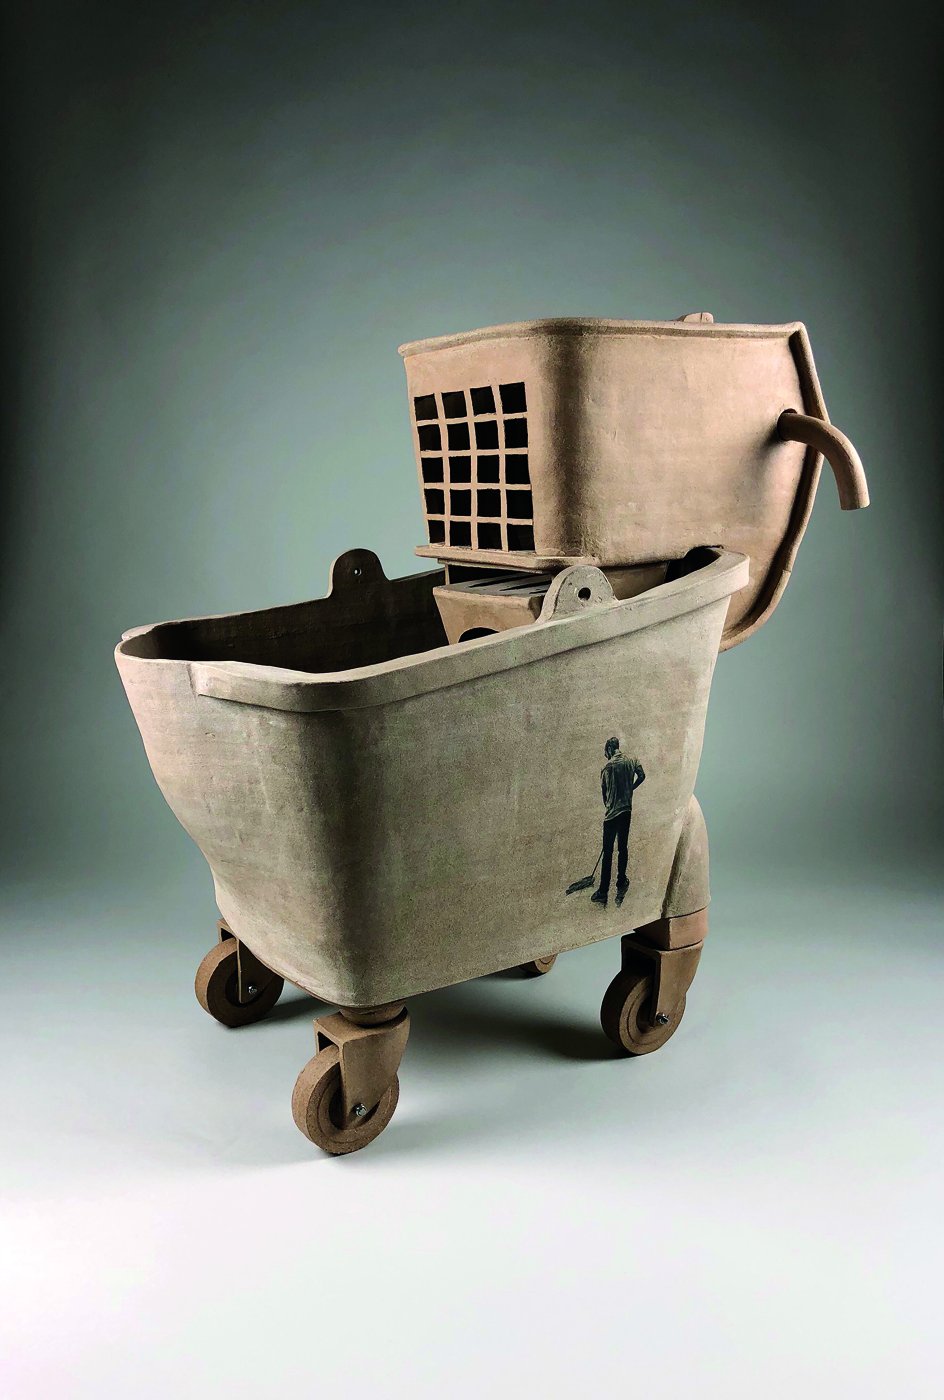 Functional mop bucket made of stoneware.